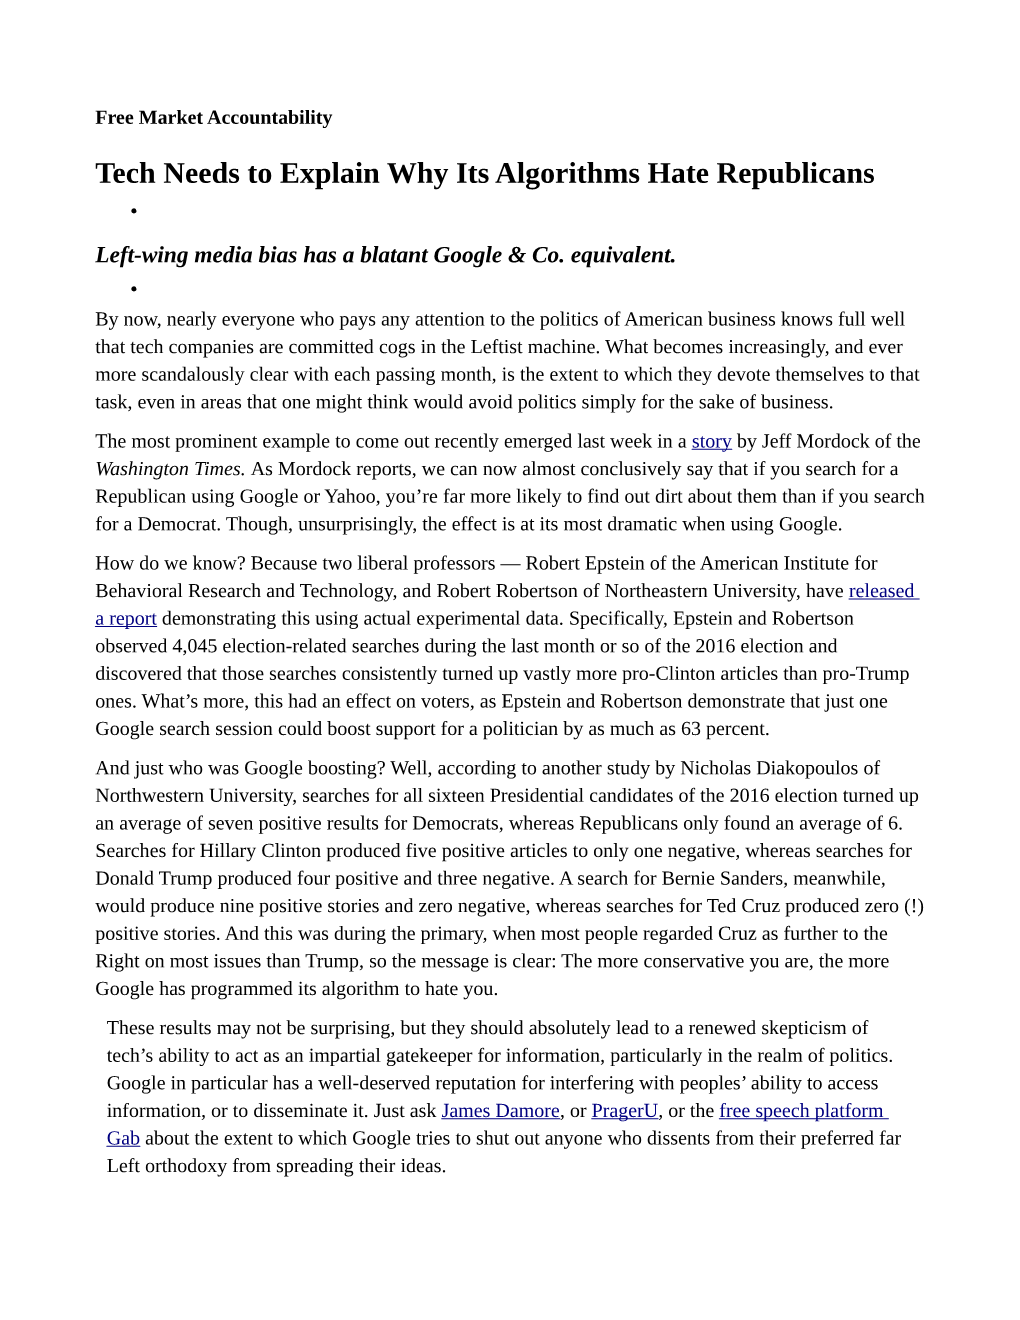 Tech Needs to Explain Why Its Algorithms Hate Republicans • Left-Wing Media Bias Has a Blatant Google & Co